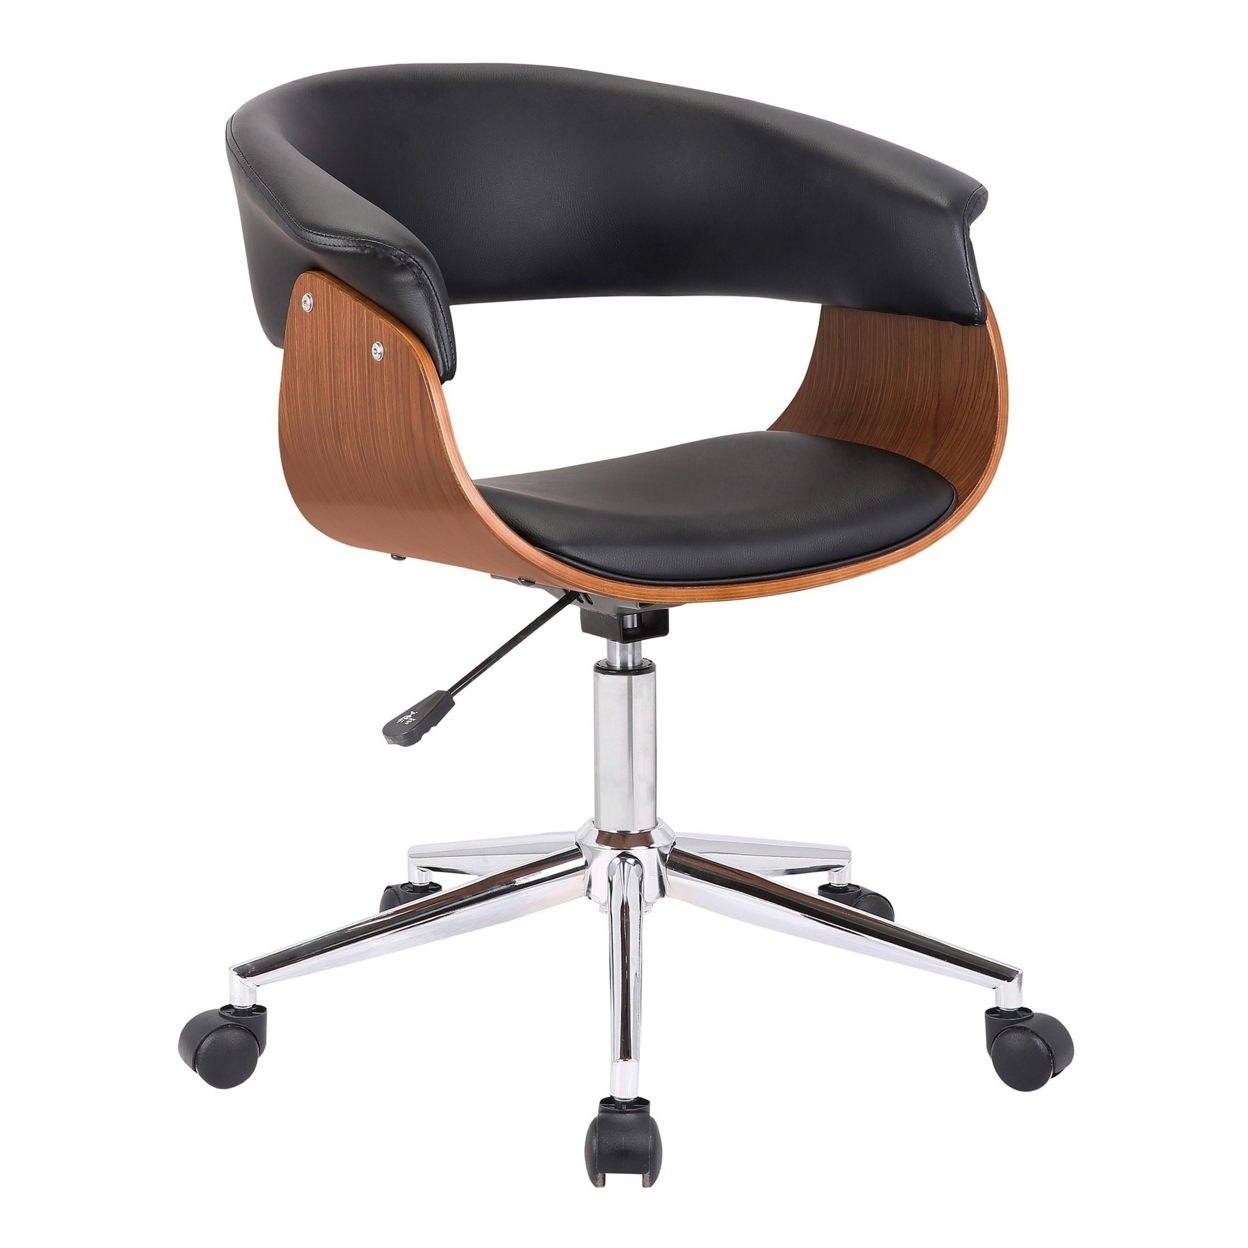 Curved Faux Leather Office Chair With Wooden Support And Star Base, Black- Saltoro Sherpi